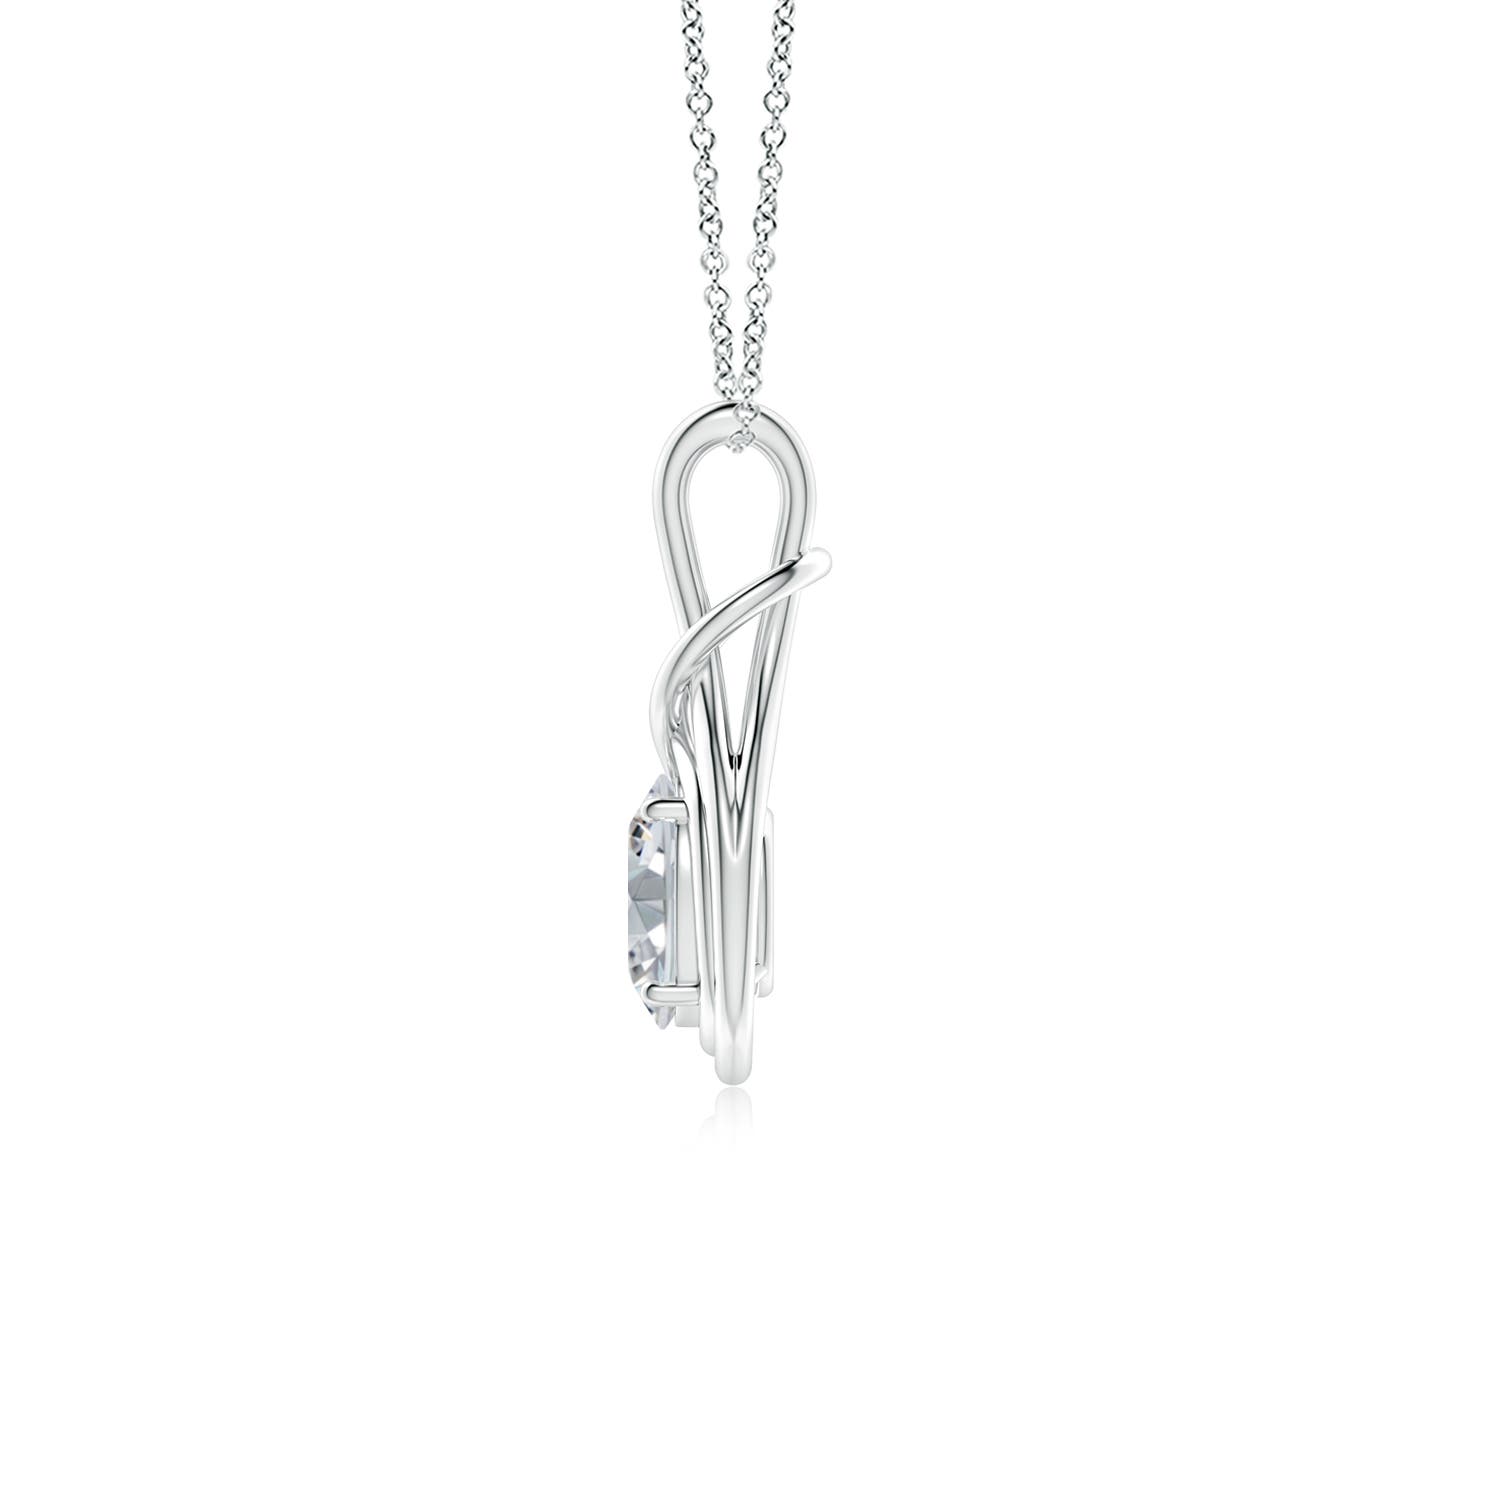 H, SI2 / 1 CT / 18 KT White Gold